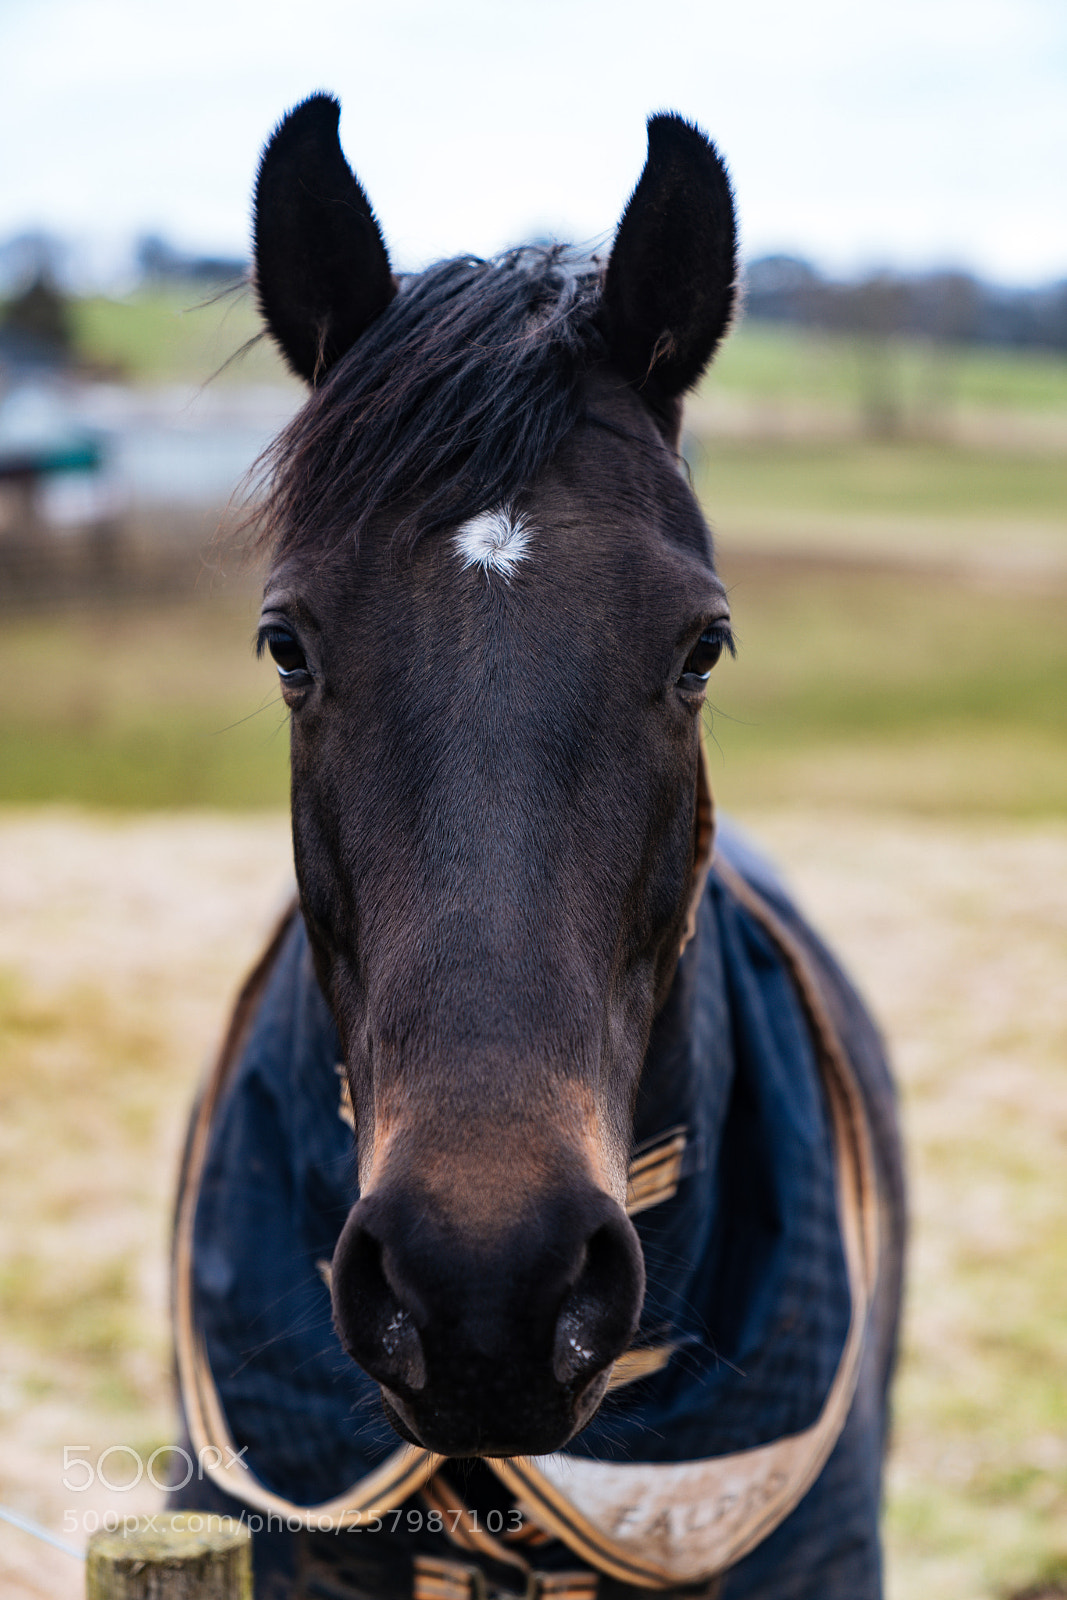 Sony a7R III sample photo. Neigh bothered photography